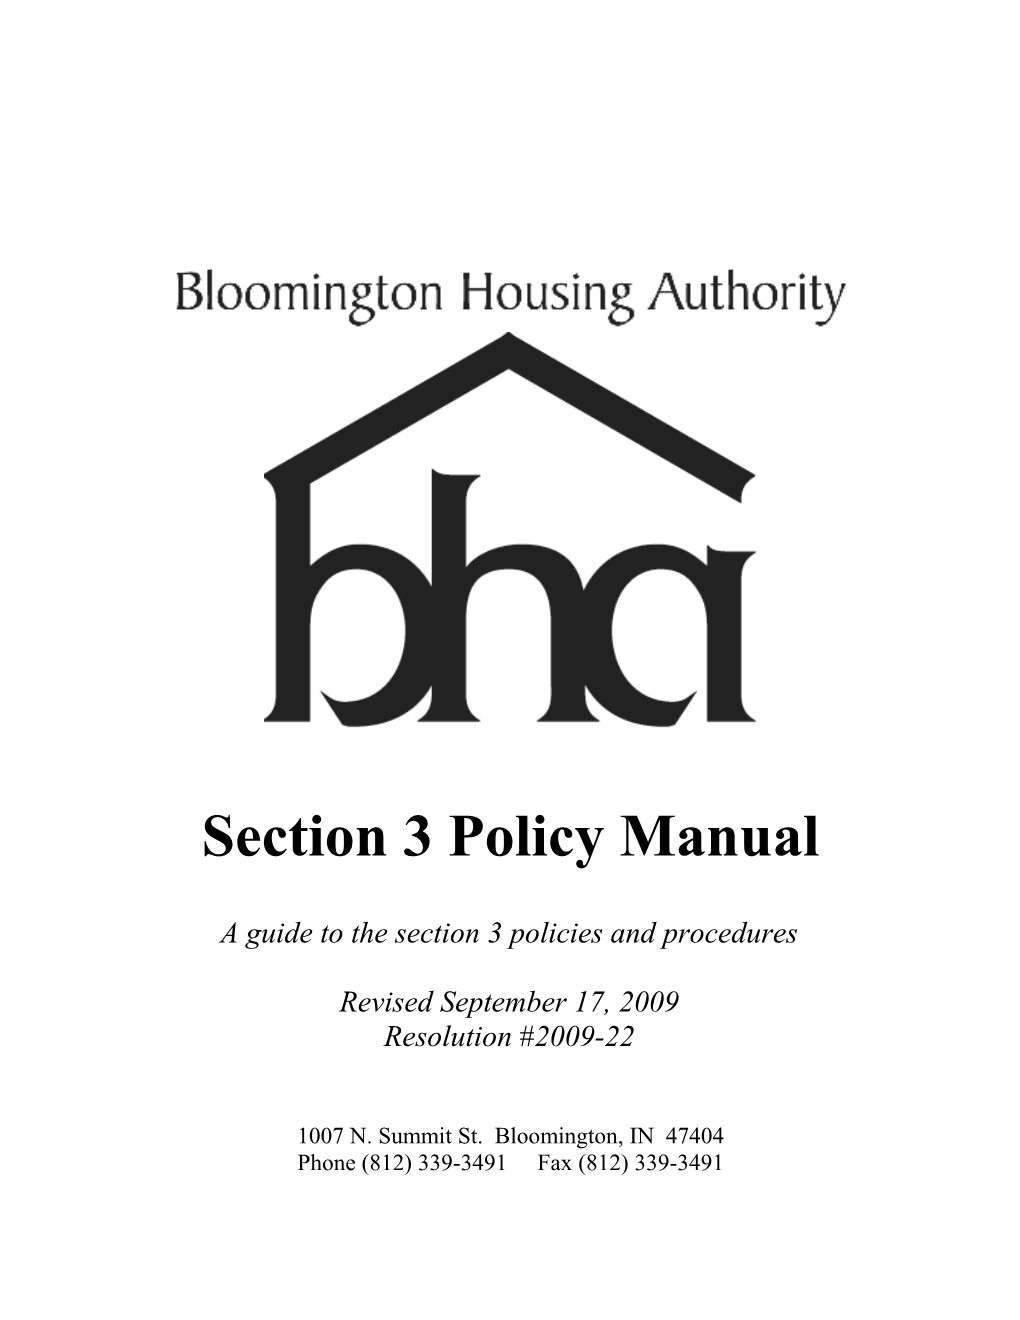 Section 3 Policy Manual